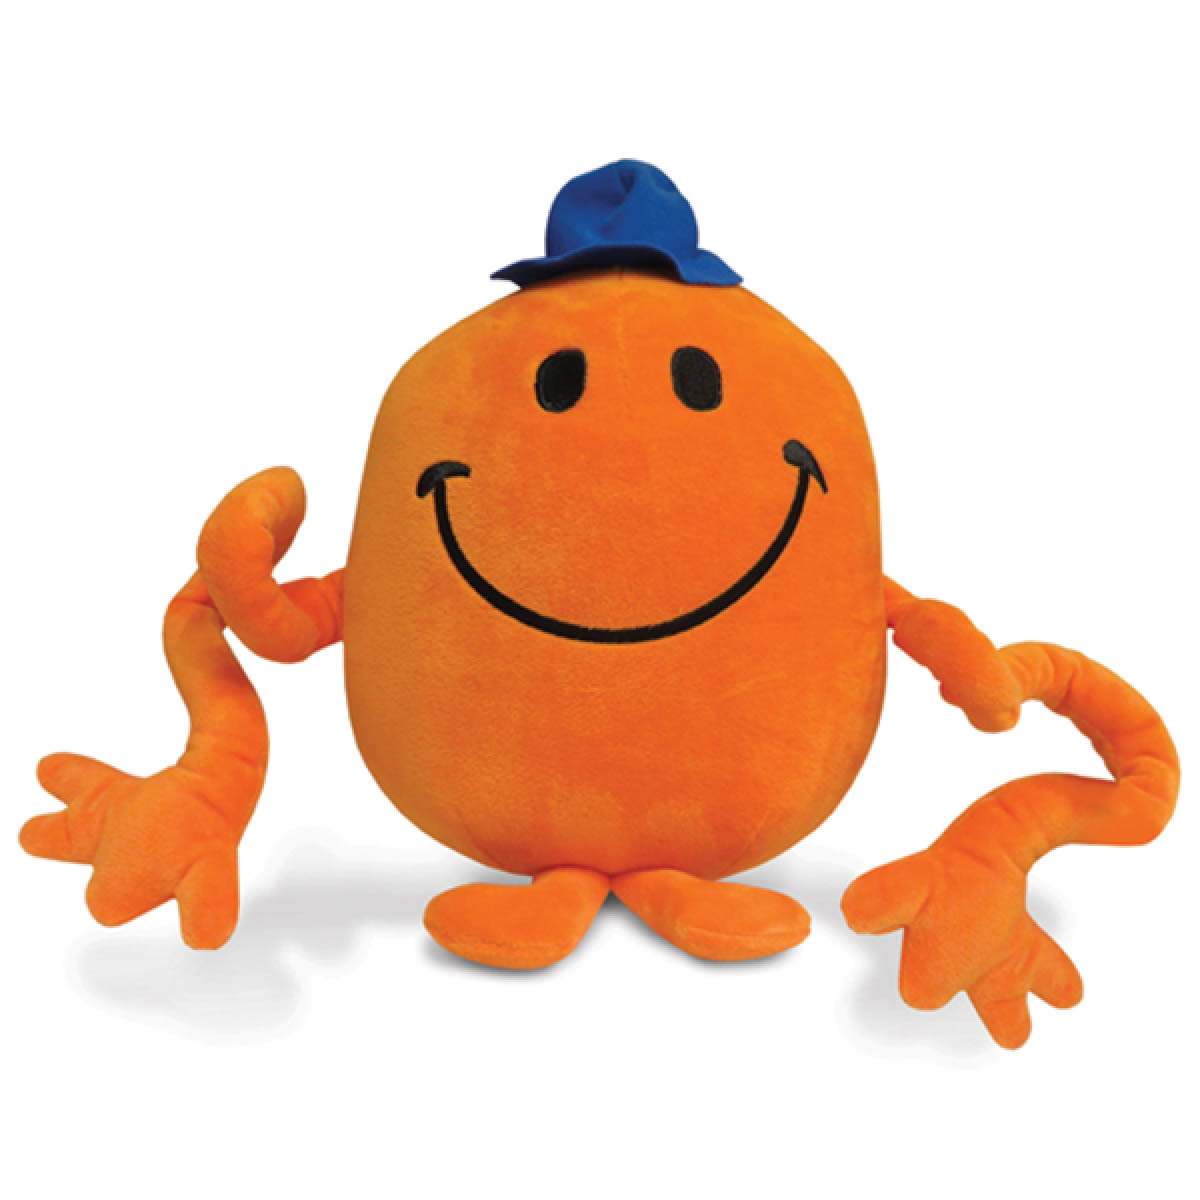 mr tickle soft toy